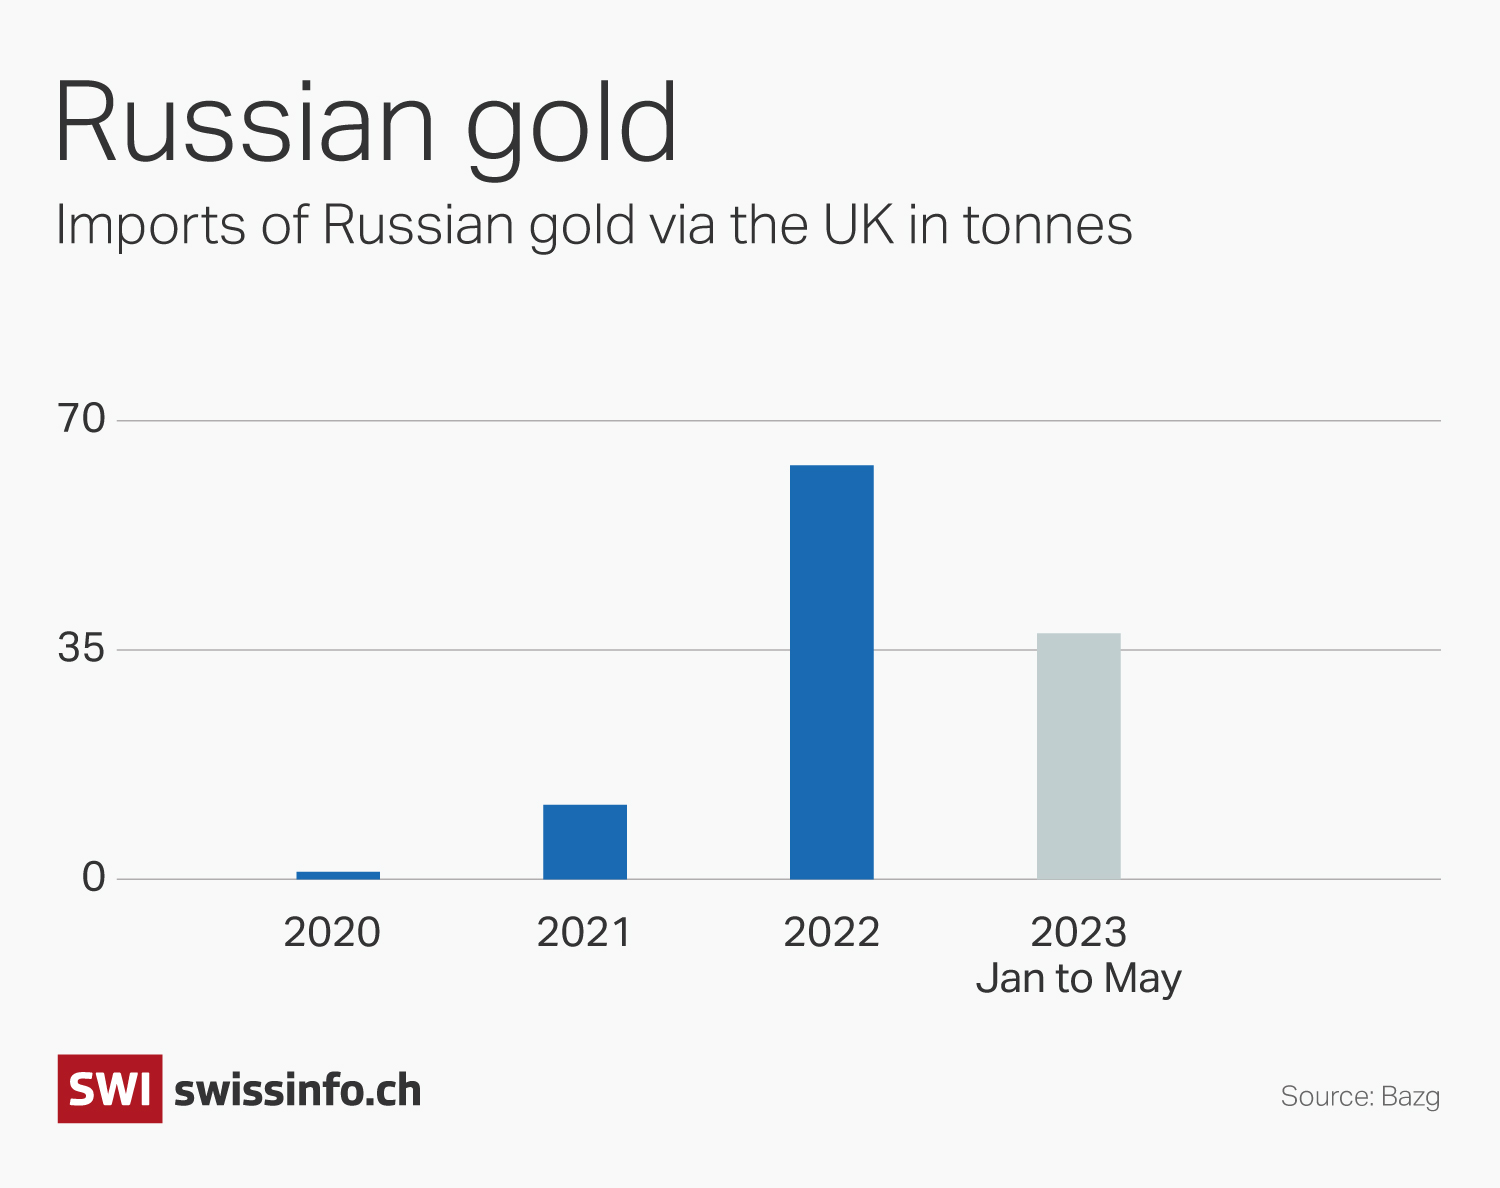 Imports of Russian gold